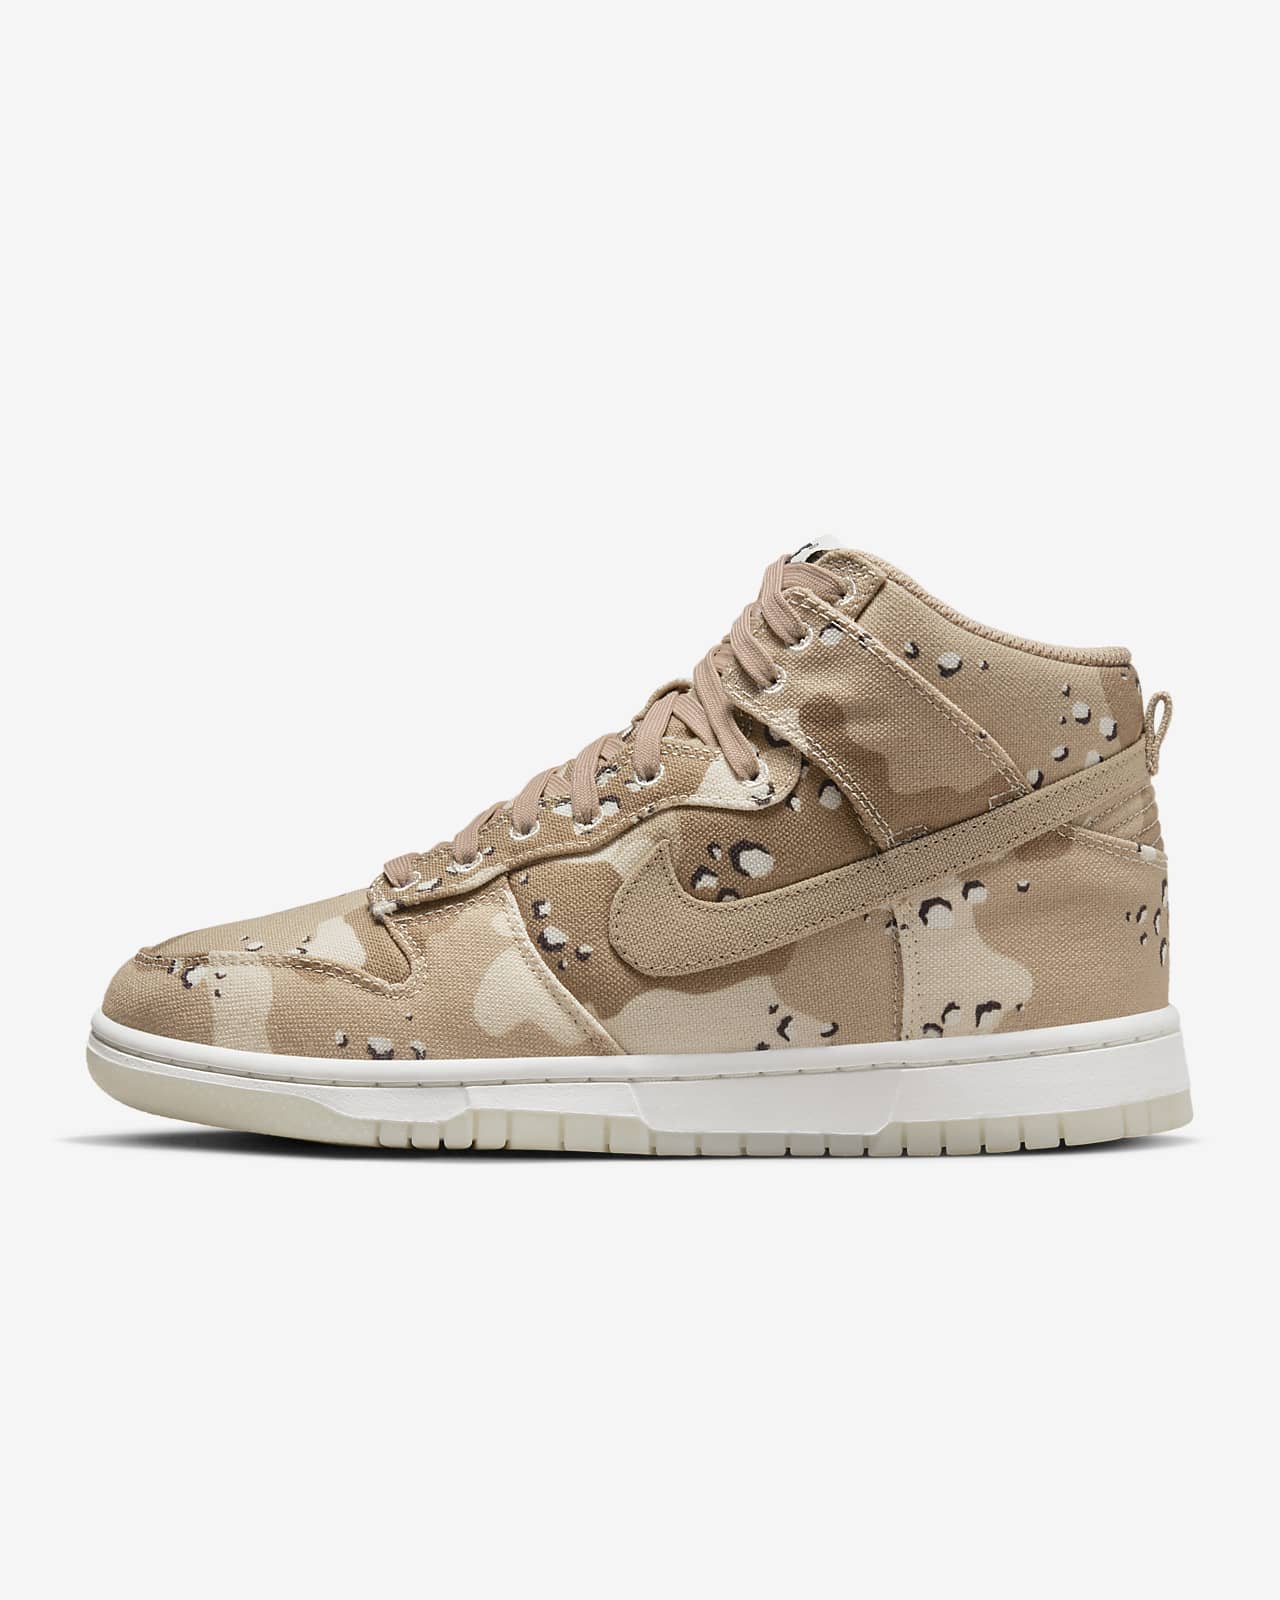 Nike Dunk High Womens Shoes Review